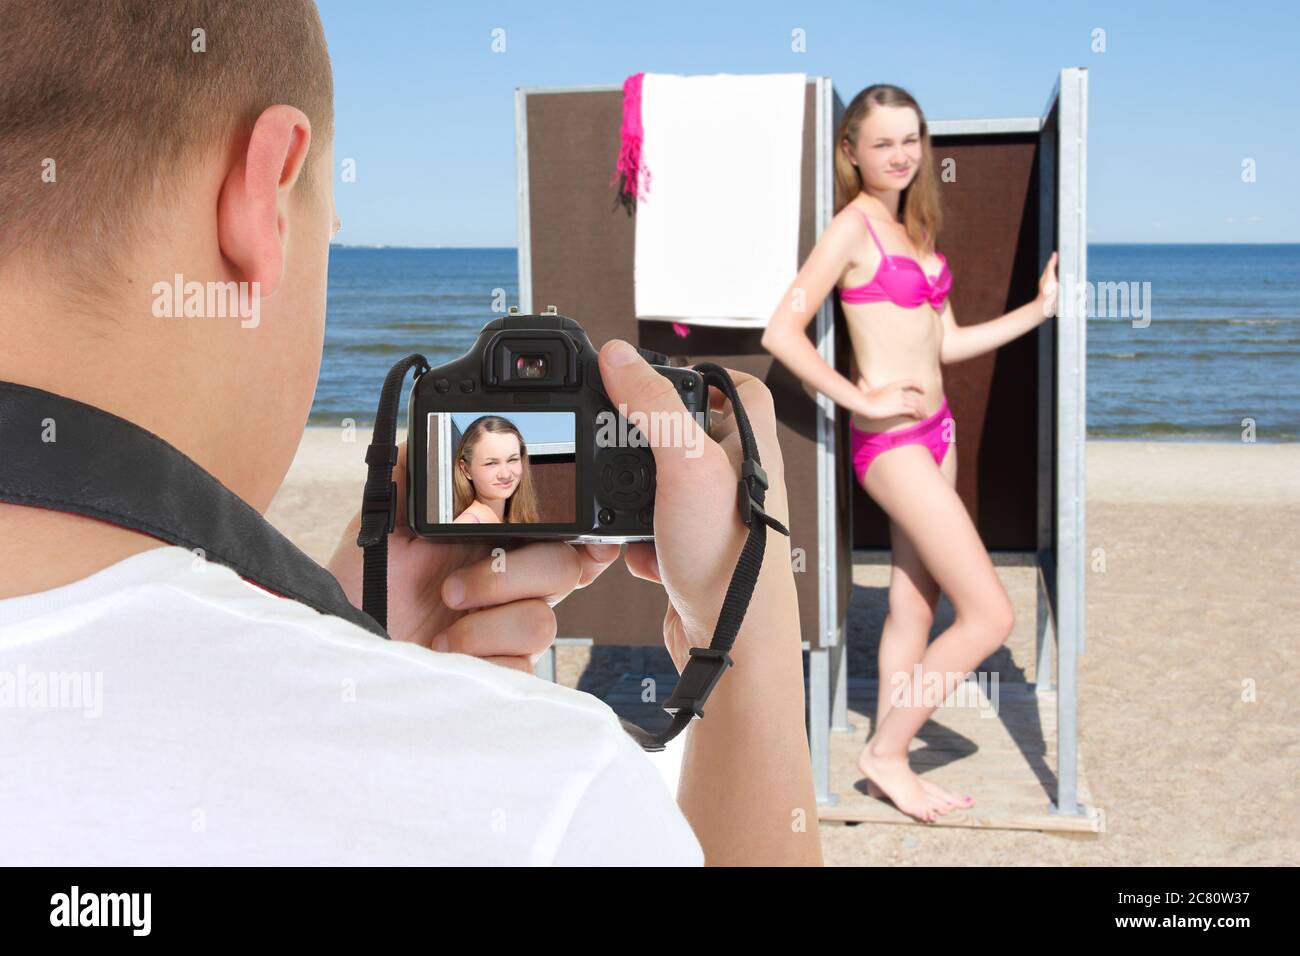 slim beautiful woman in changing cabin and photographer on the beach Stock  Photo - Alamy